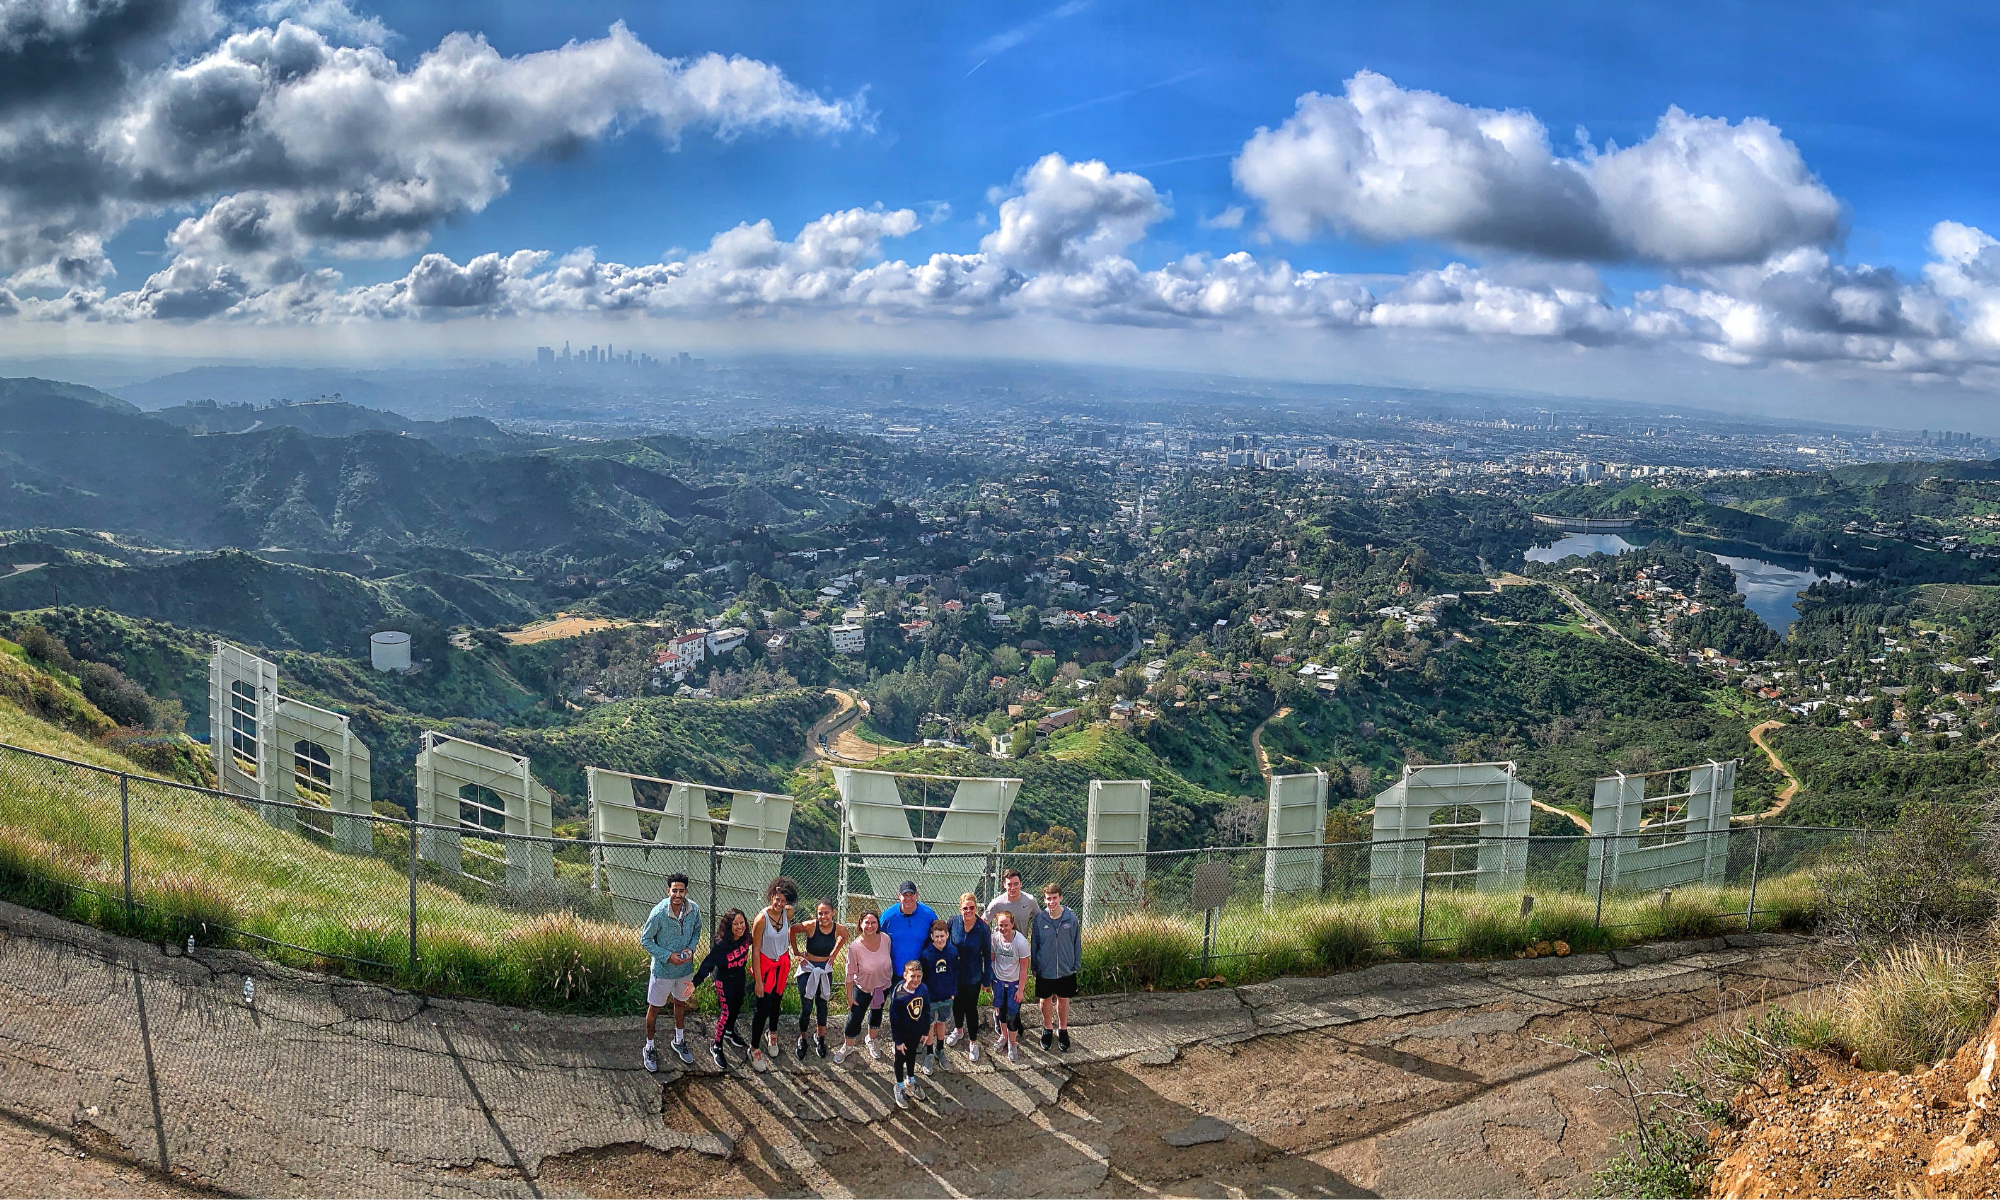 Hollywood Sign Hike Los Angeles California Things to Do Near Me